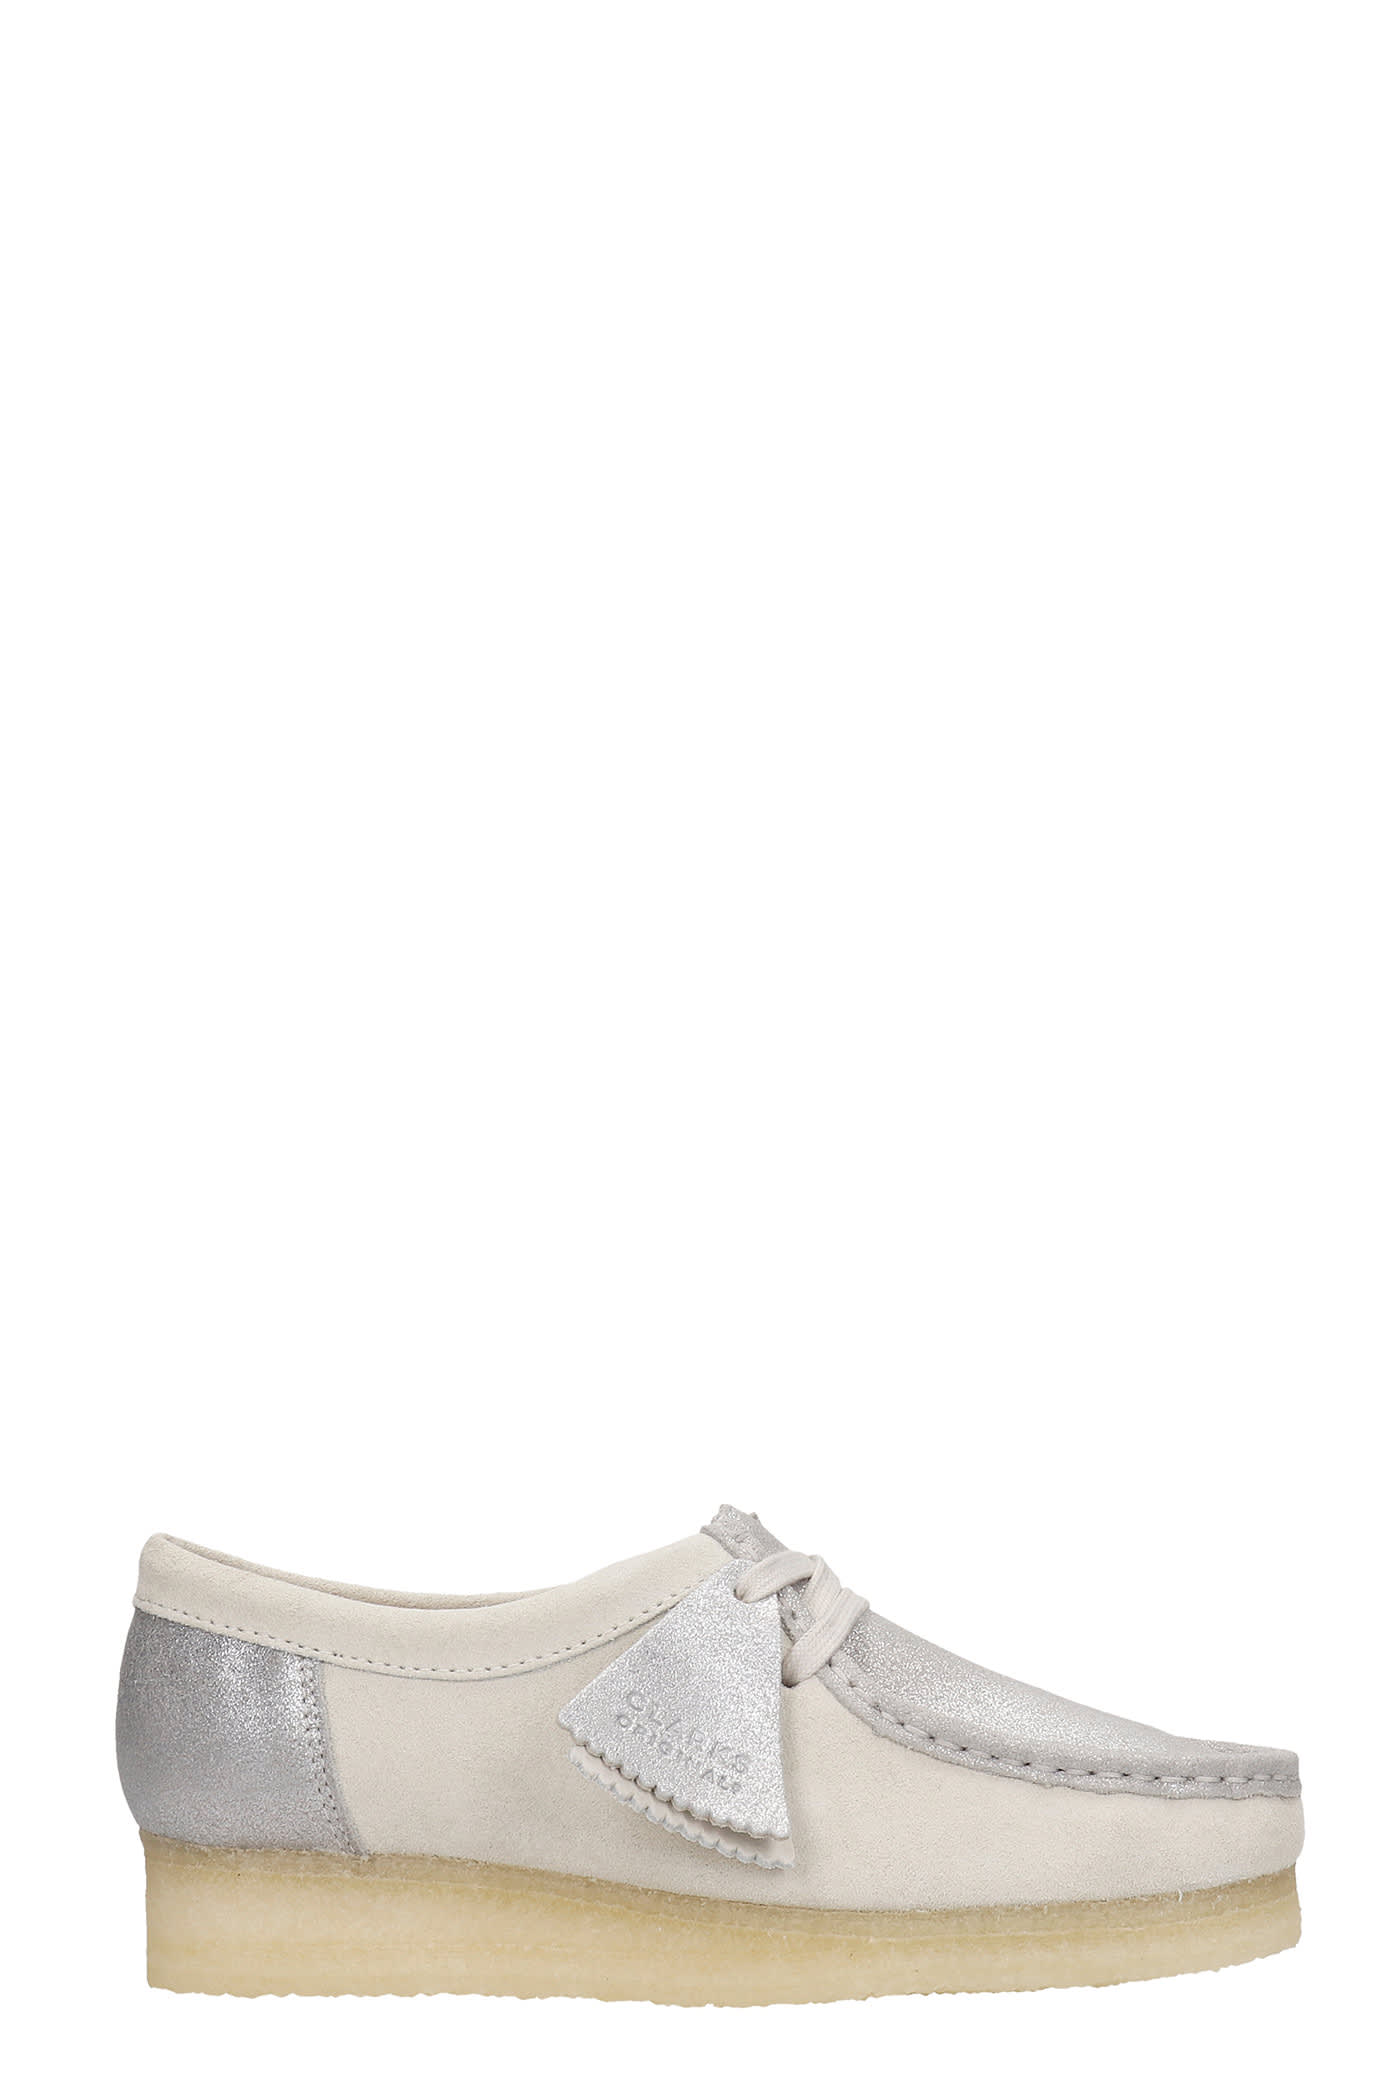 Clarks Wallabee Lace Up Shoes In Silver Suede And Leather